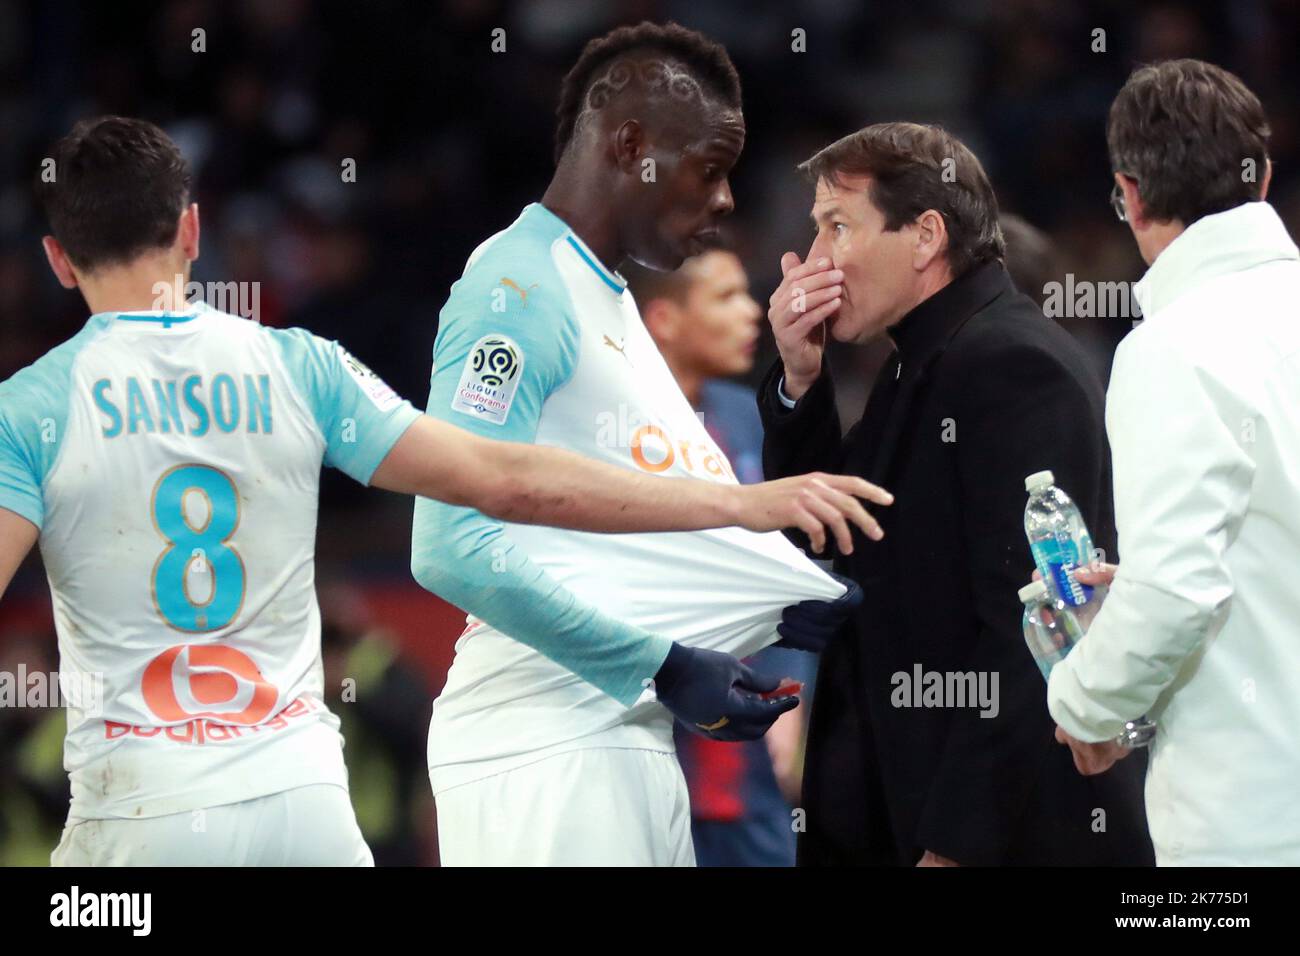 Marseille head coach Rudy Garcia speaks with Mario Balotelli of Marseille in  action during the Ligue 1 soccer match between Paris Saint Germain (PSG) and Olympique de Marseille (OM) at the Parc des Princes stadium in Paris on March 17, 2019.  Stock Photo